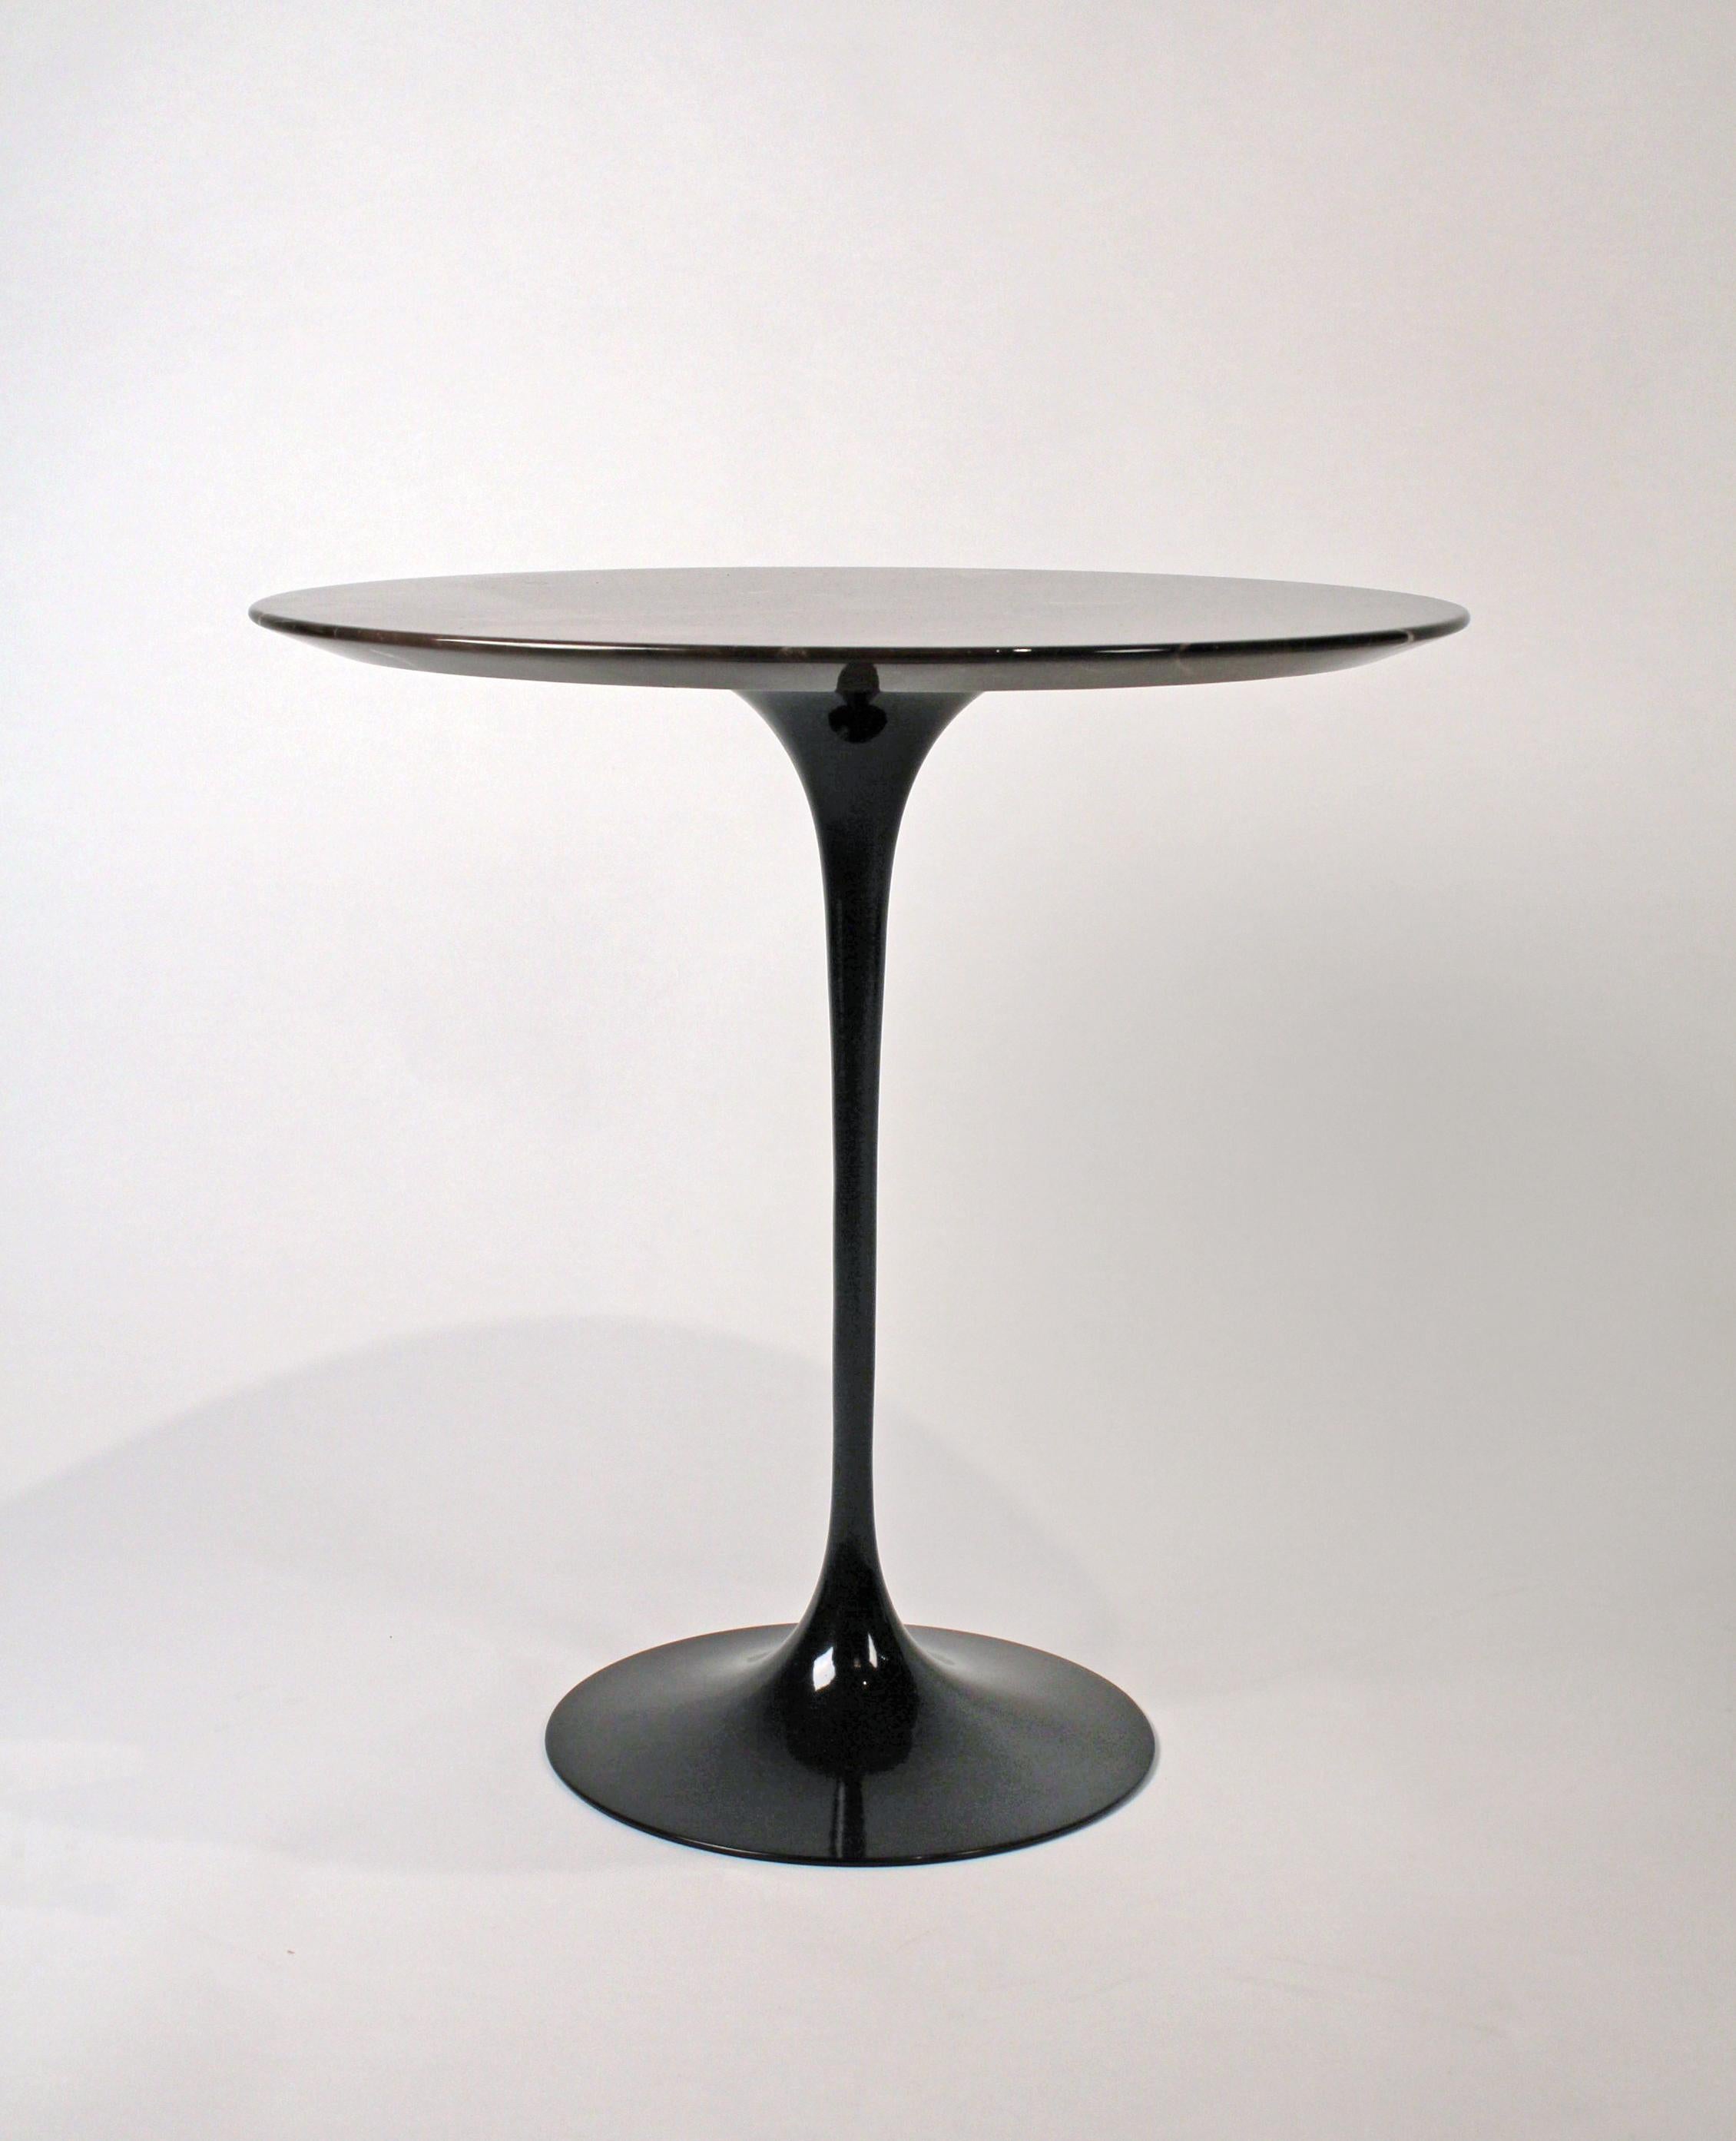 Original Eero Saarinen side table manufactured with black base and polished espresso top.